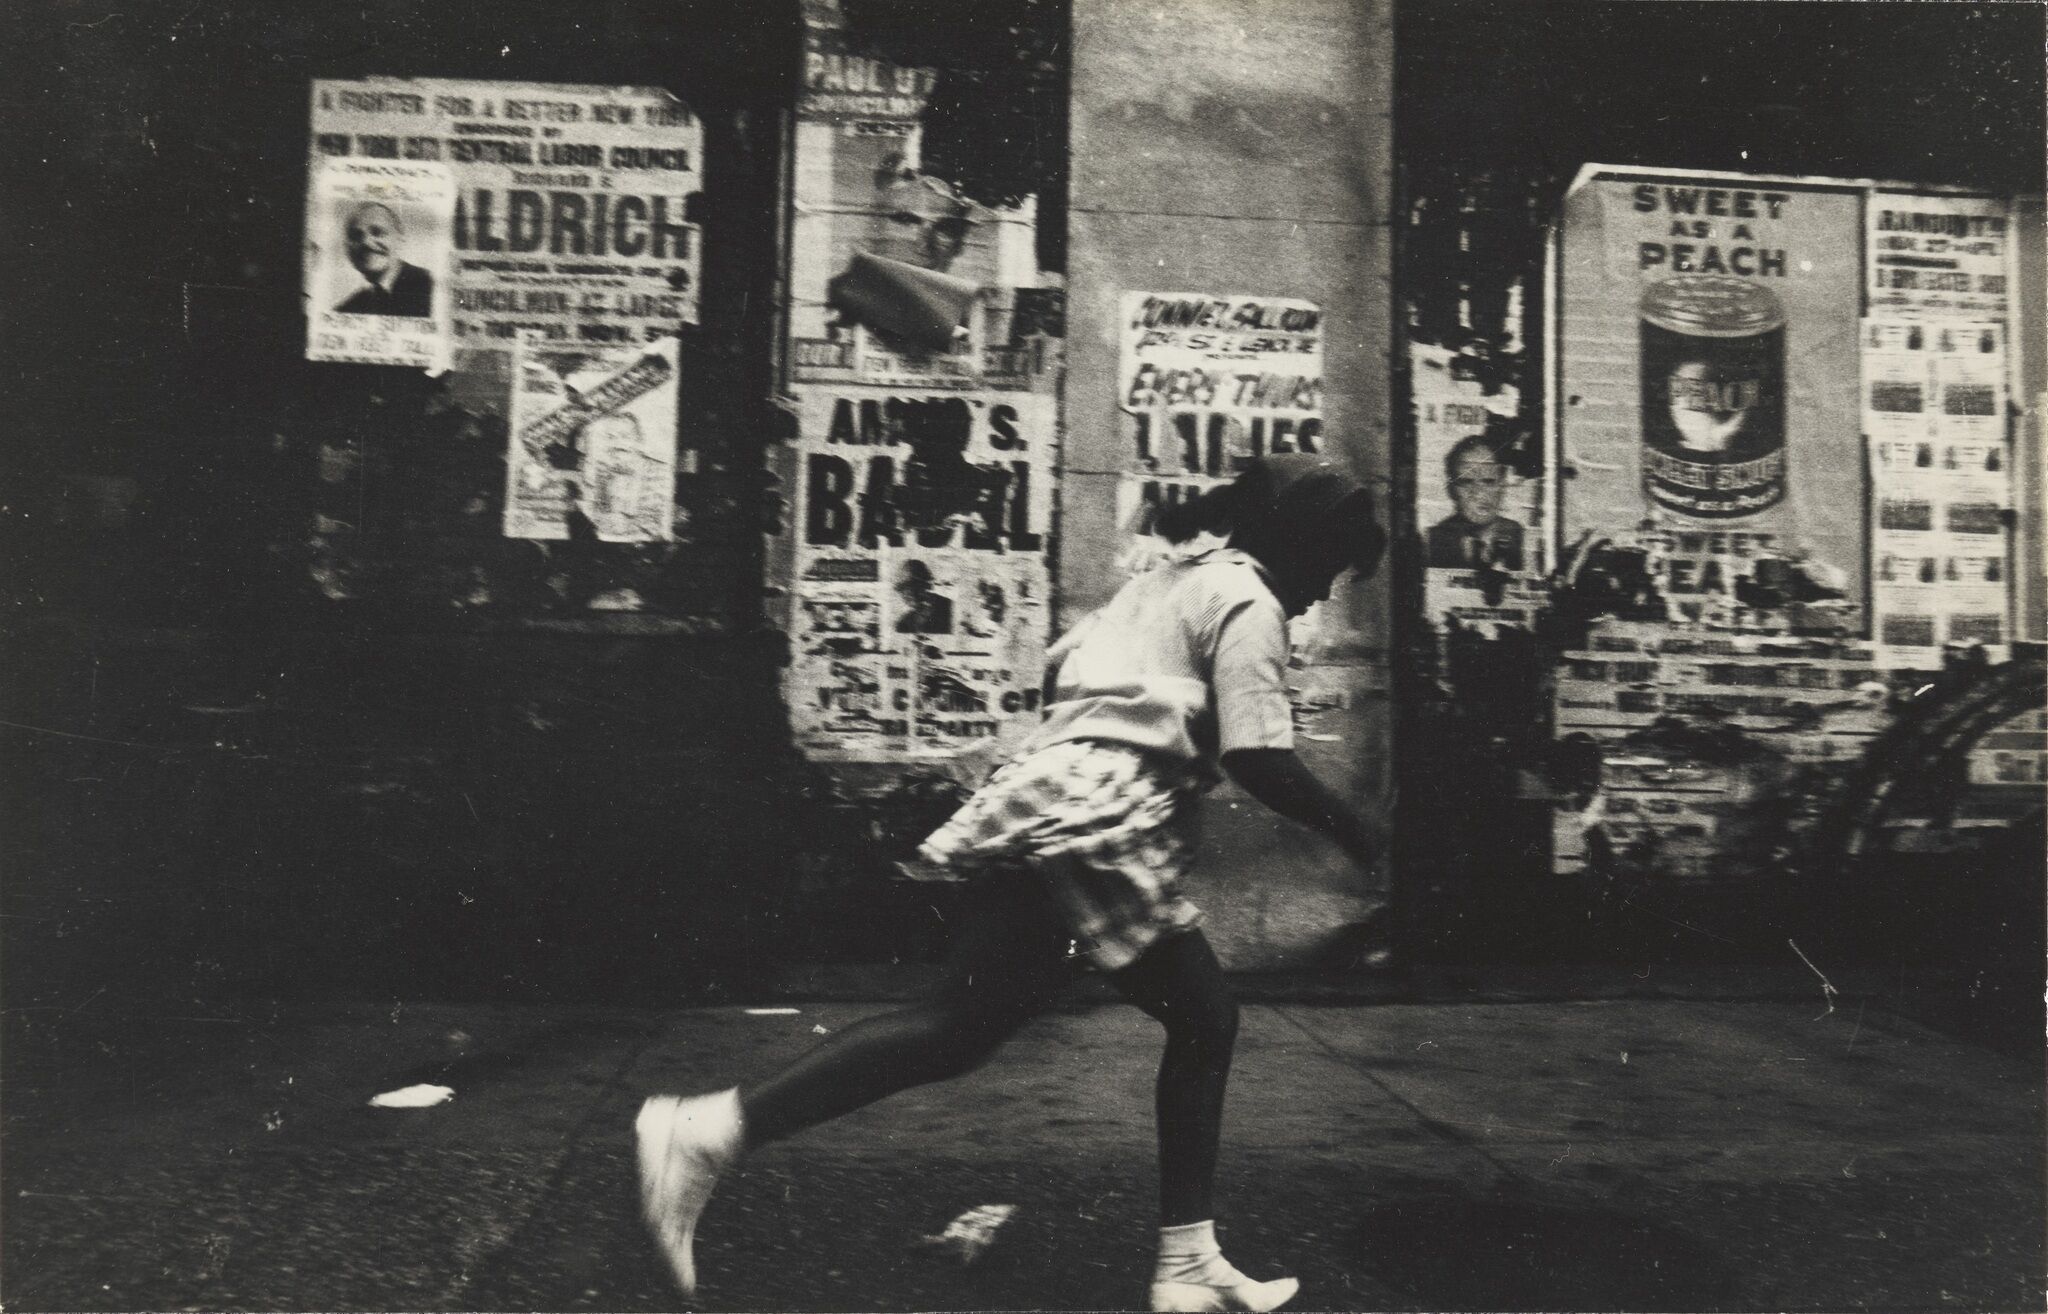 A girl running on a street with print advertisements pasted on the wall next to her.